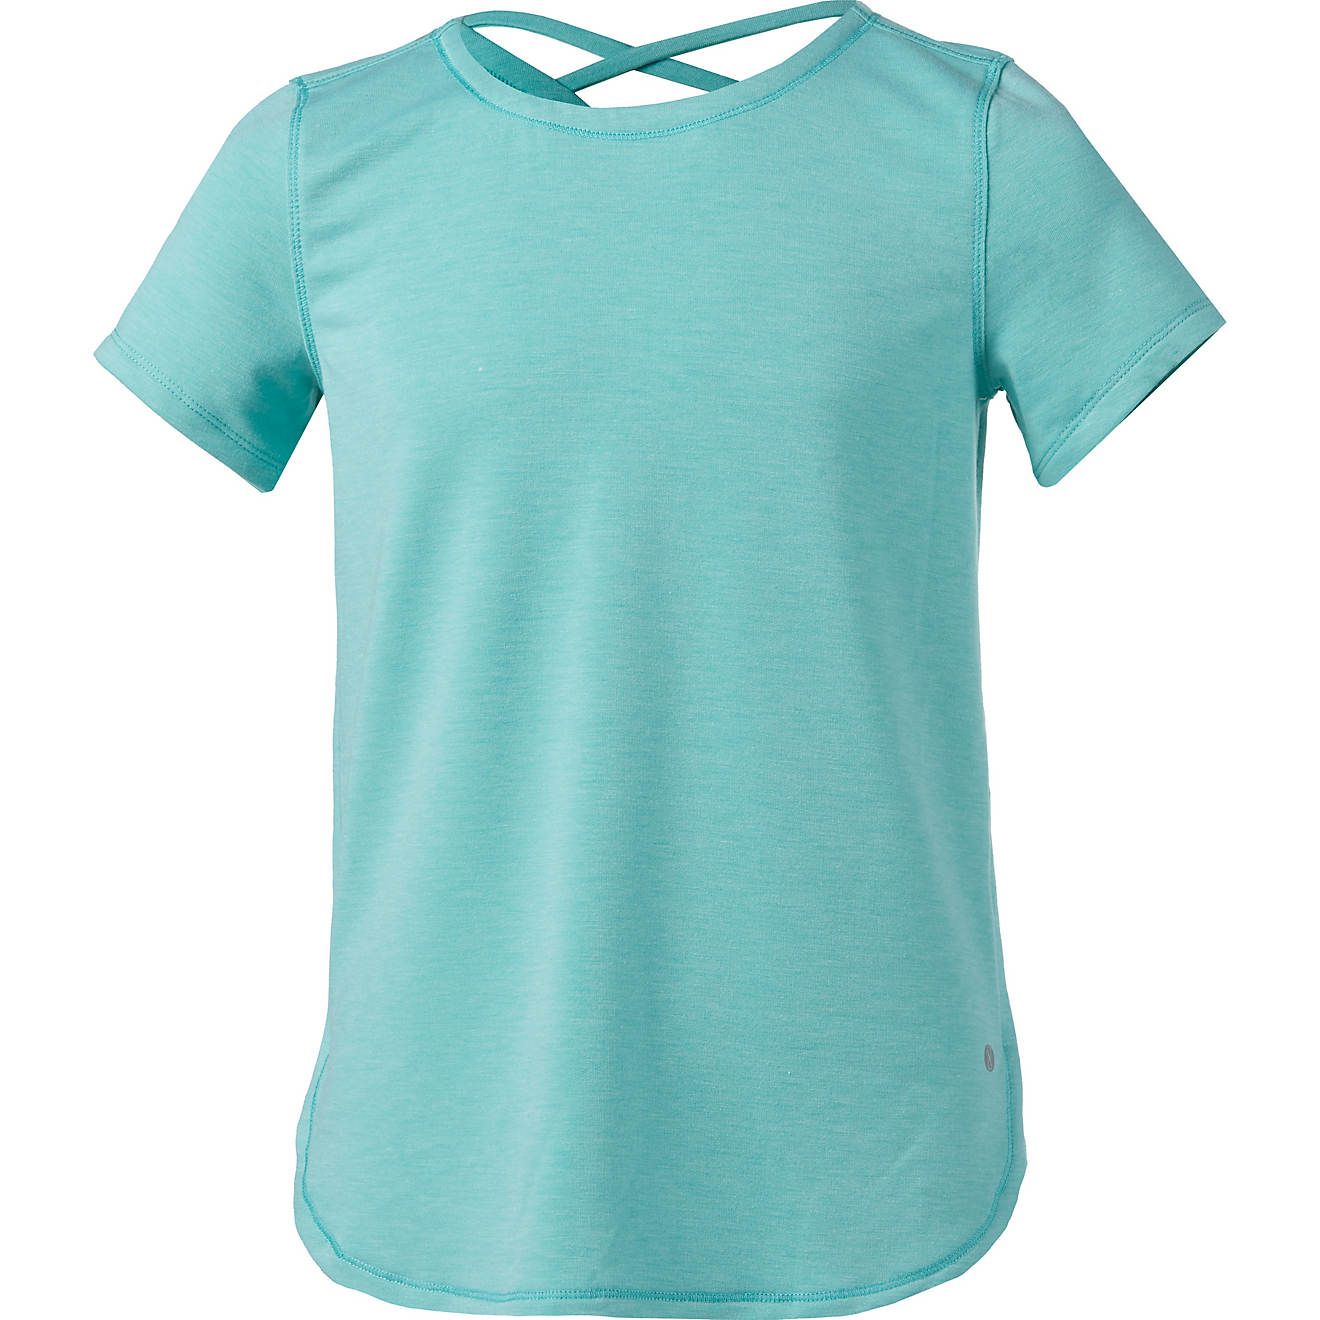 Layer 8 Girls' Hi-Low Terry T-shirt | Academy Sports + Outdoor Affiliate